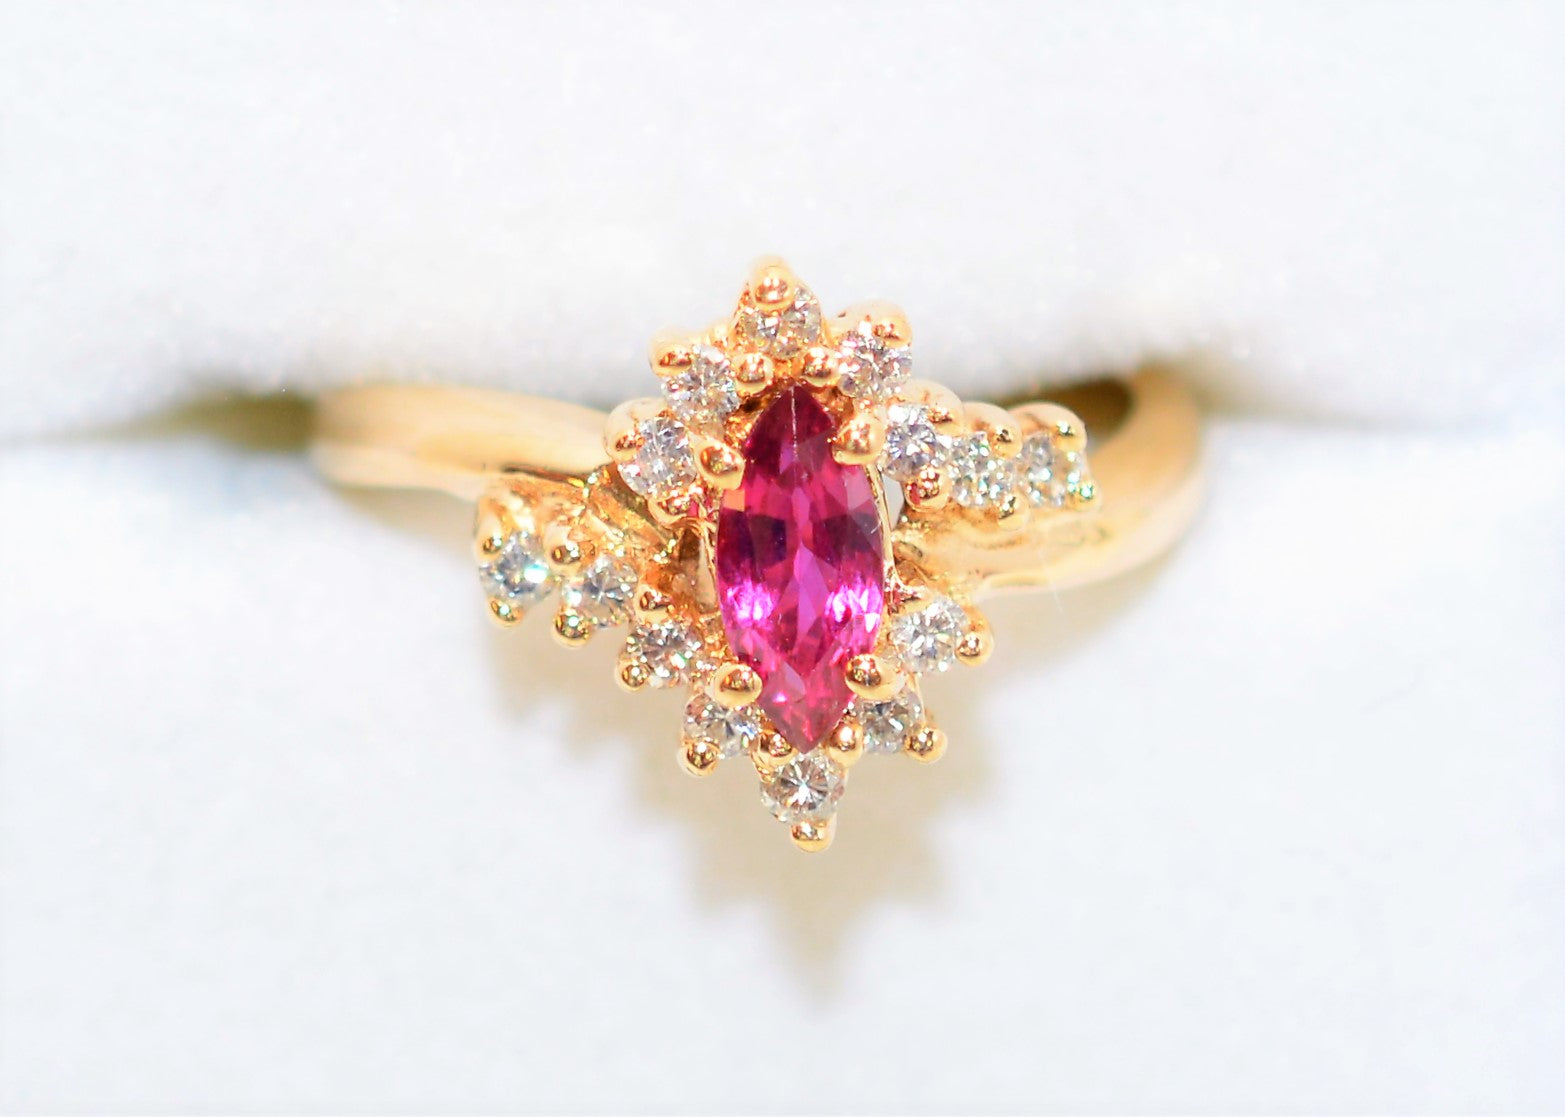 Natural Ruby & Diamond Ring 14K Solid Gold .80tcw Ruby Ring Gemstone Ring Birthstone Ring Engagement Ring Cocktail Statement Ring Estate